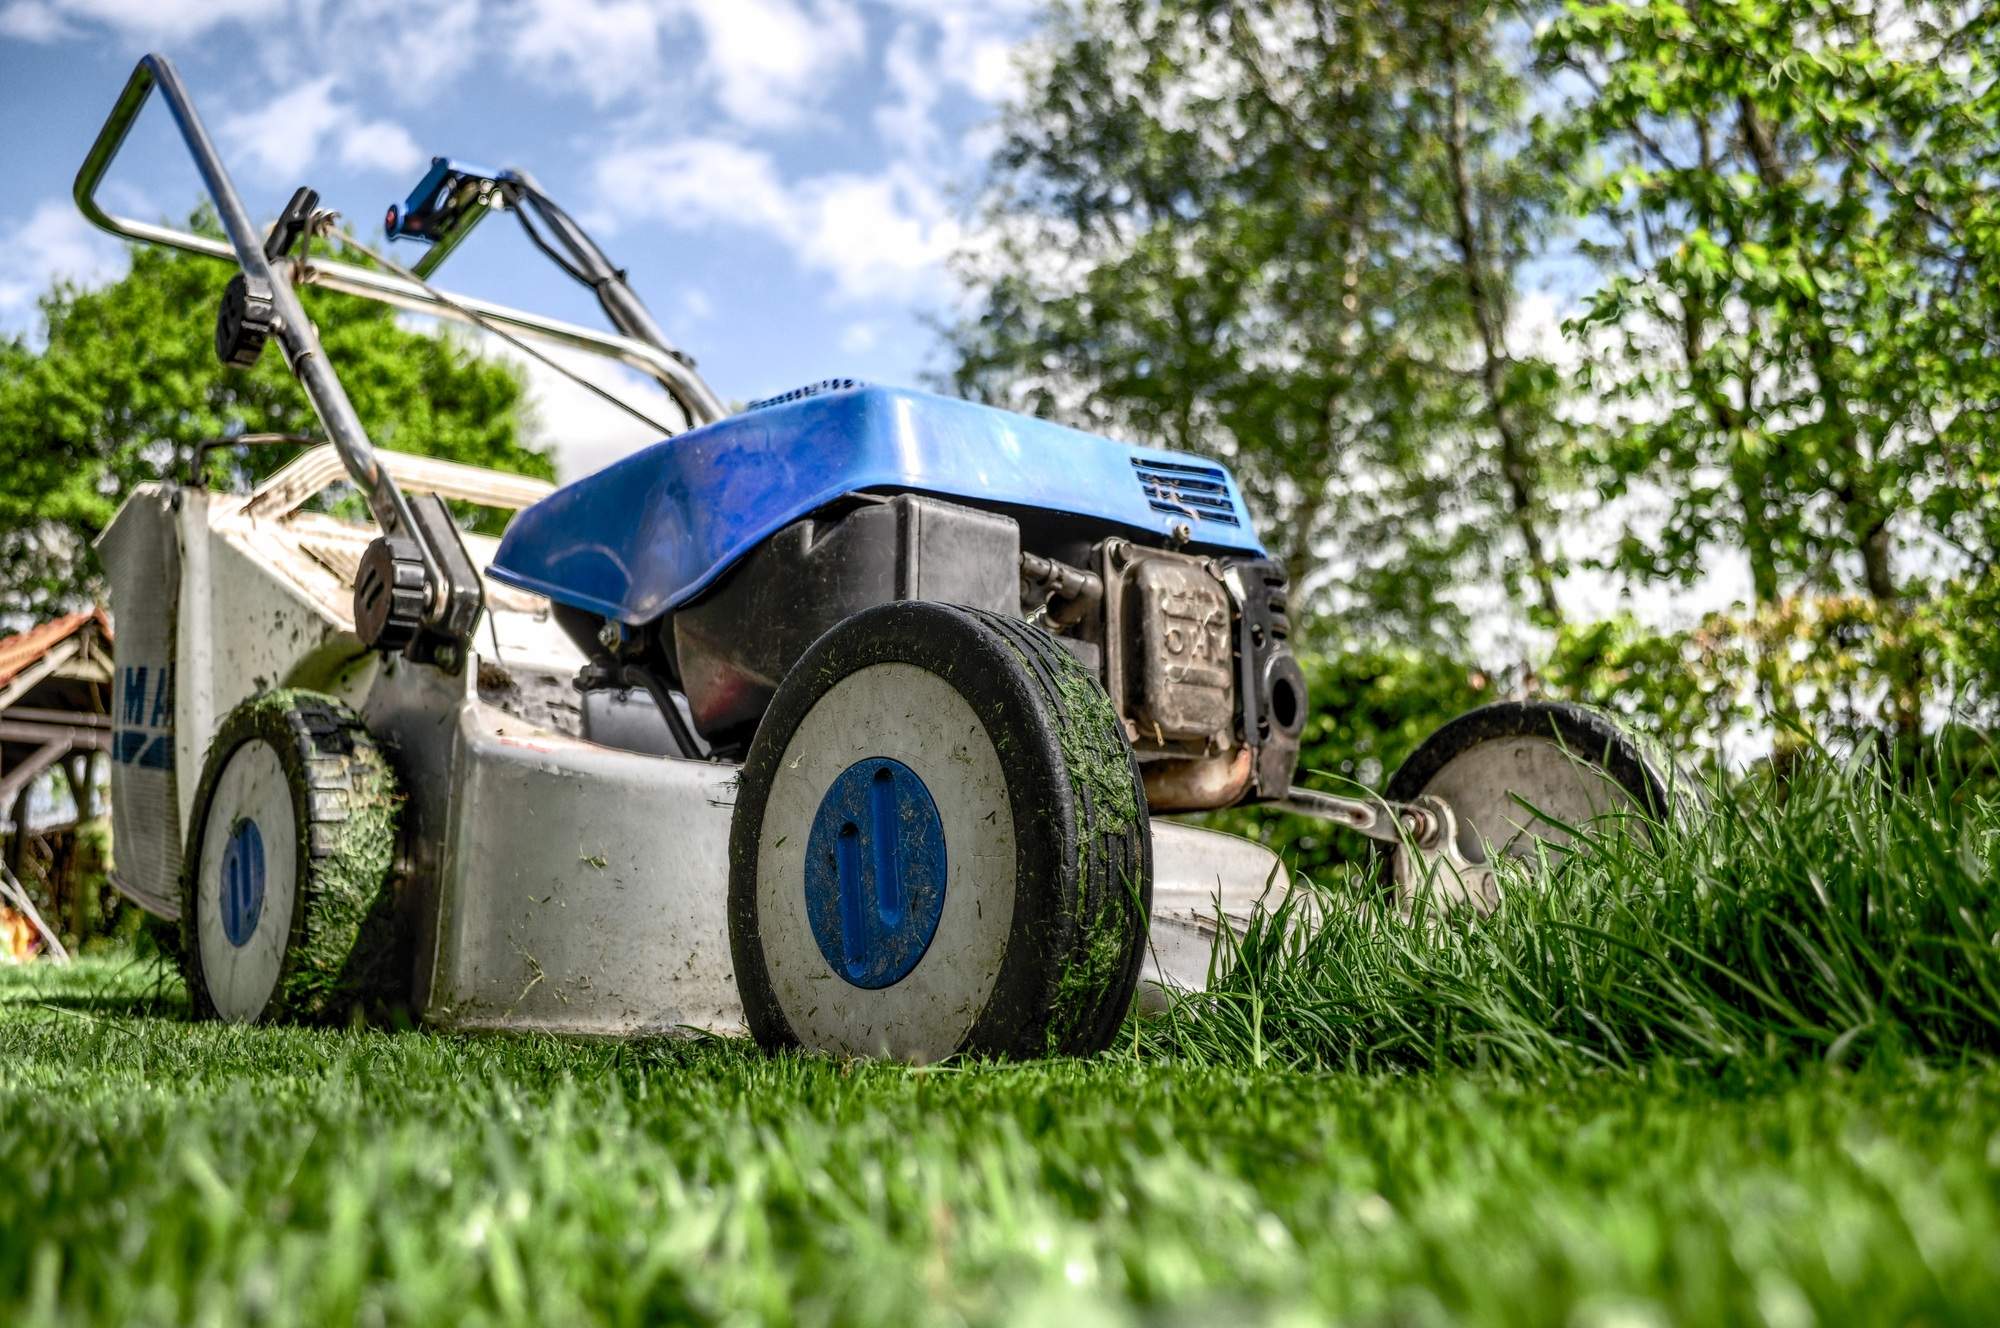 Lawnmower Repair: Should I Buy New or Used Replacement Parts?